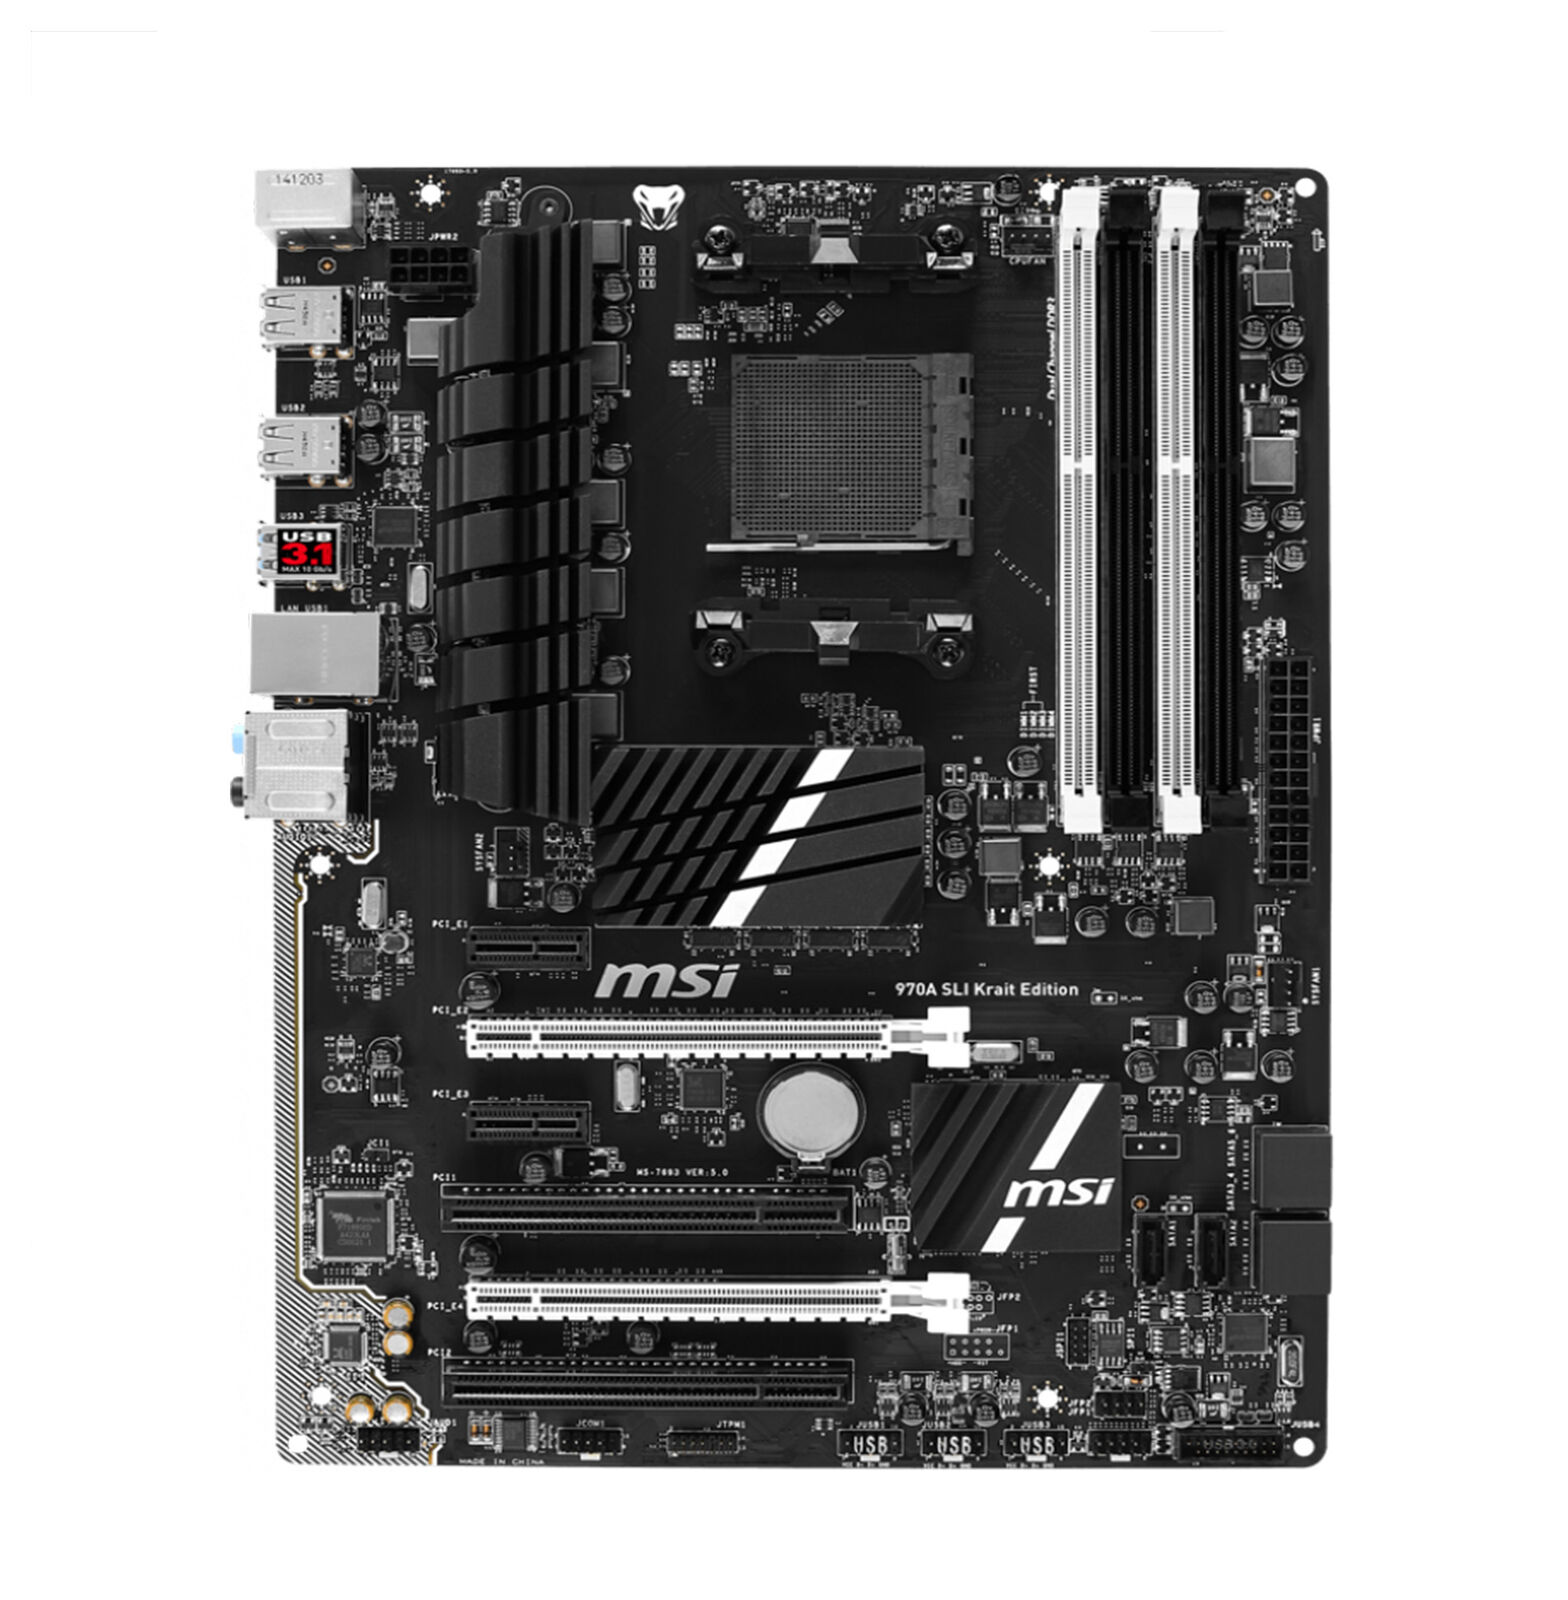 100% Tested FOR MSI 970A SLI KRAIT EDITION Motherboard Supports FX8350 32GB